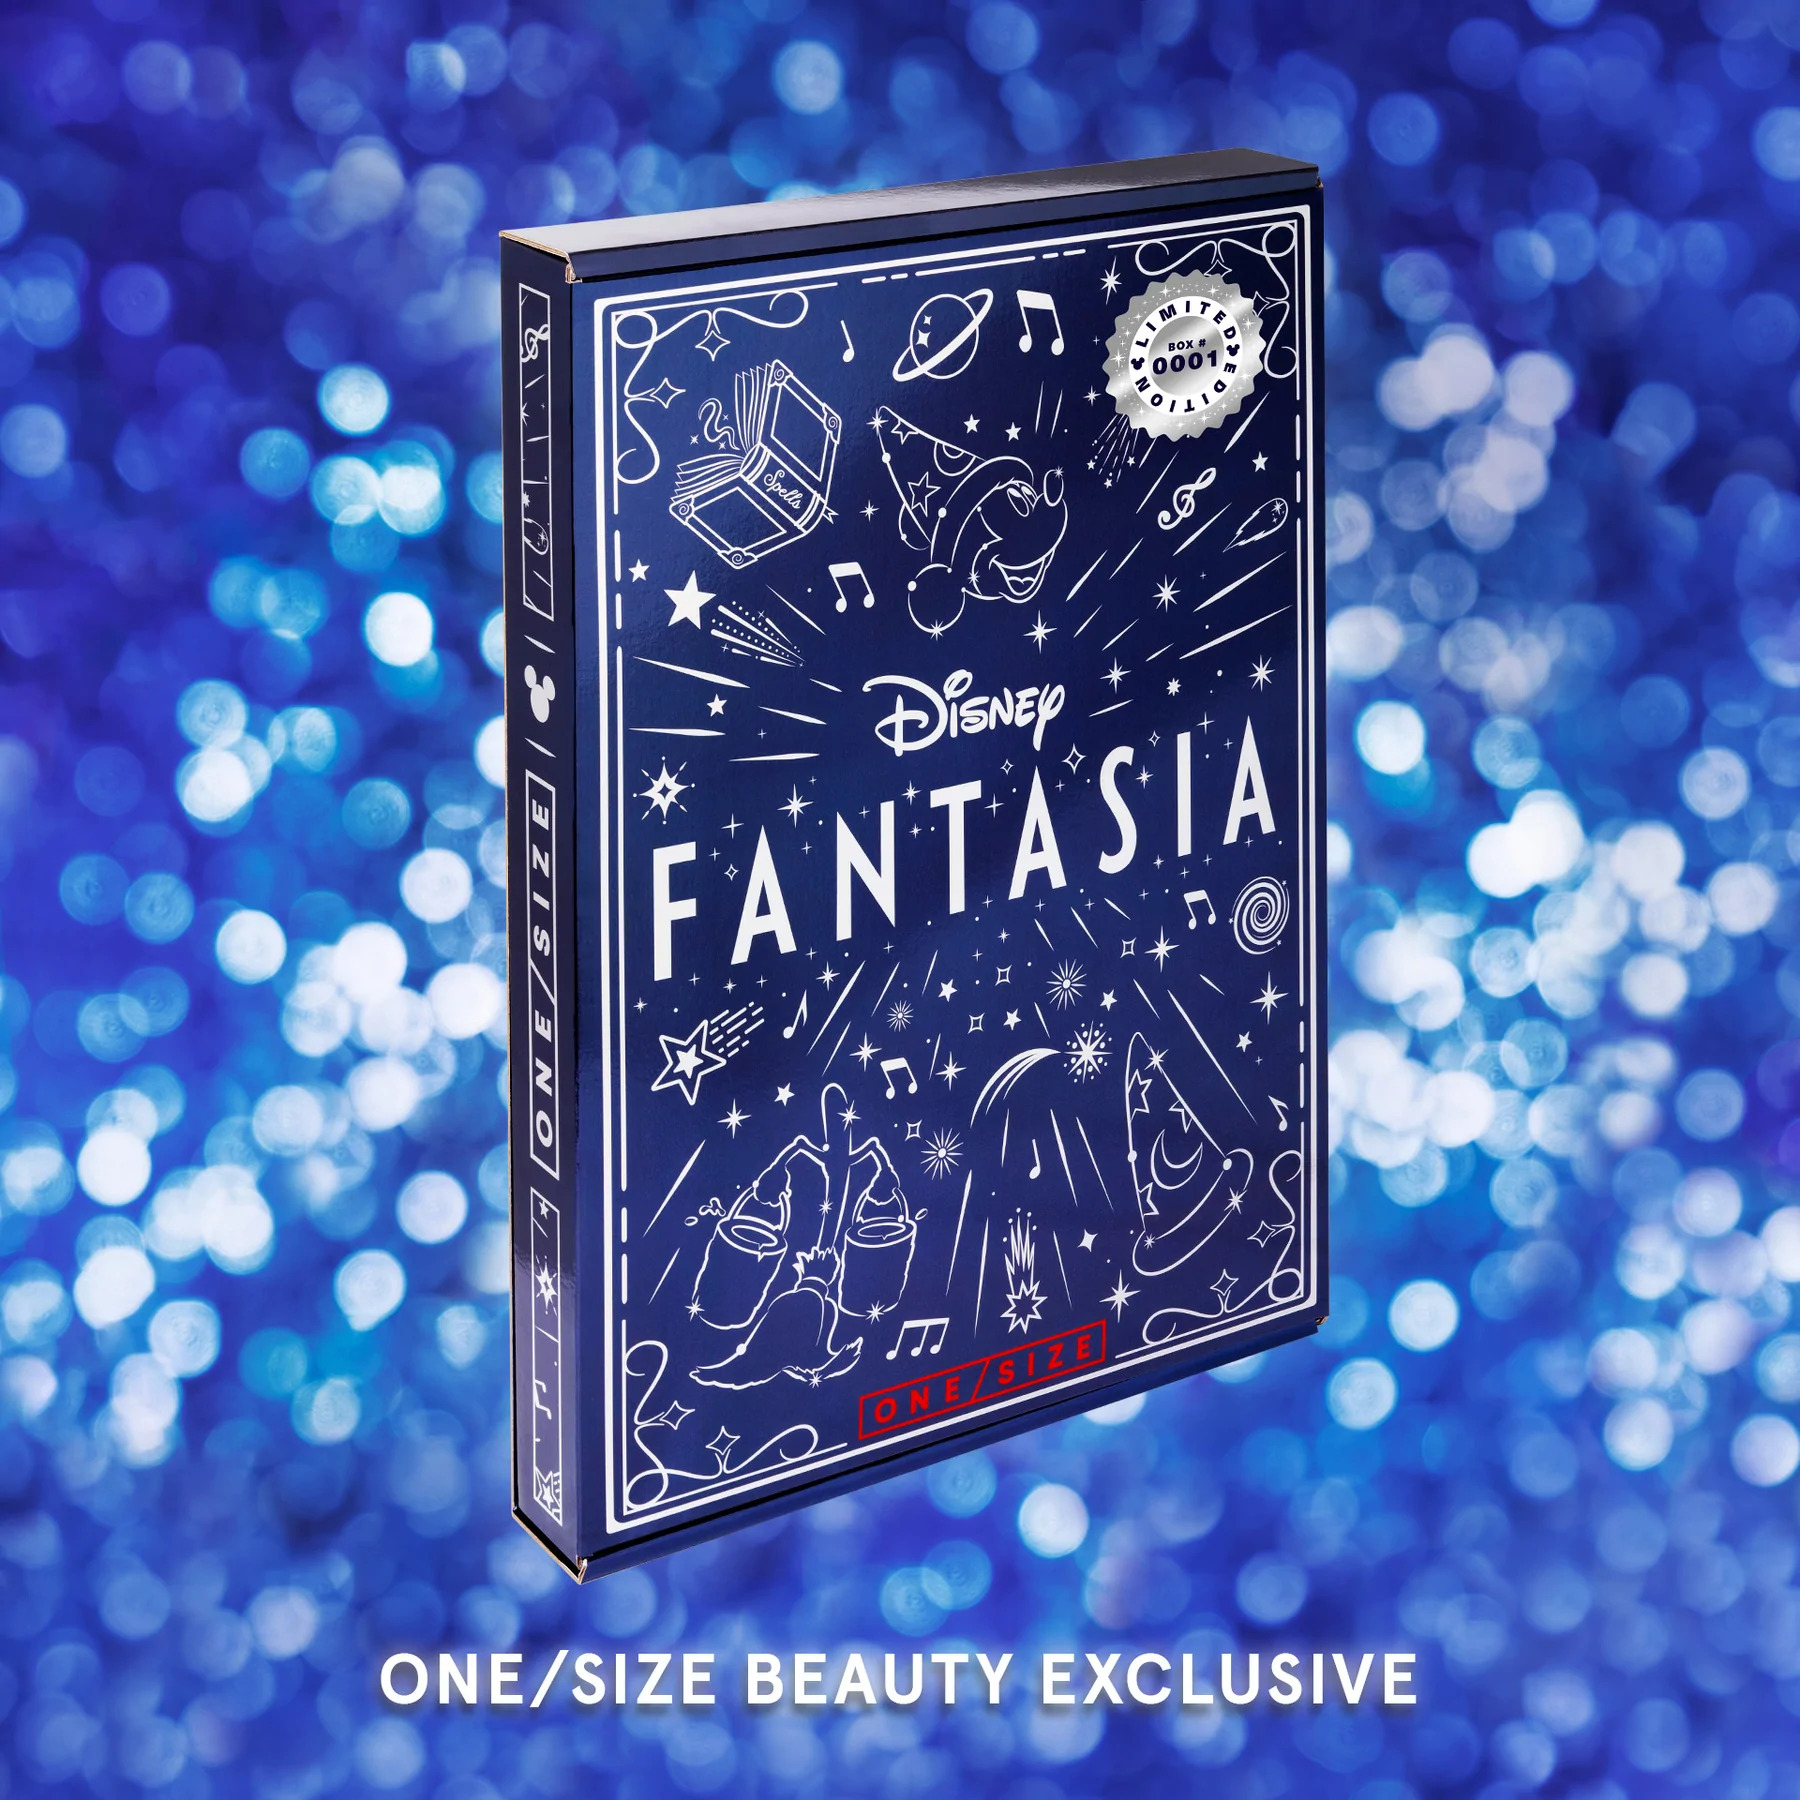 One/Size Beauty: Disney Fantasia Collection 